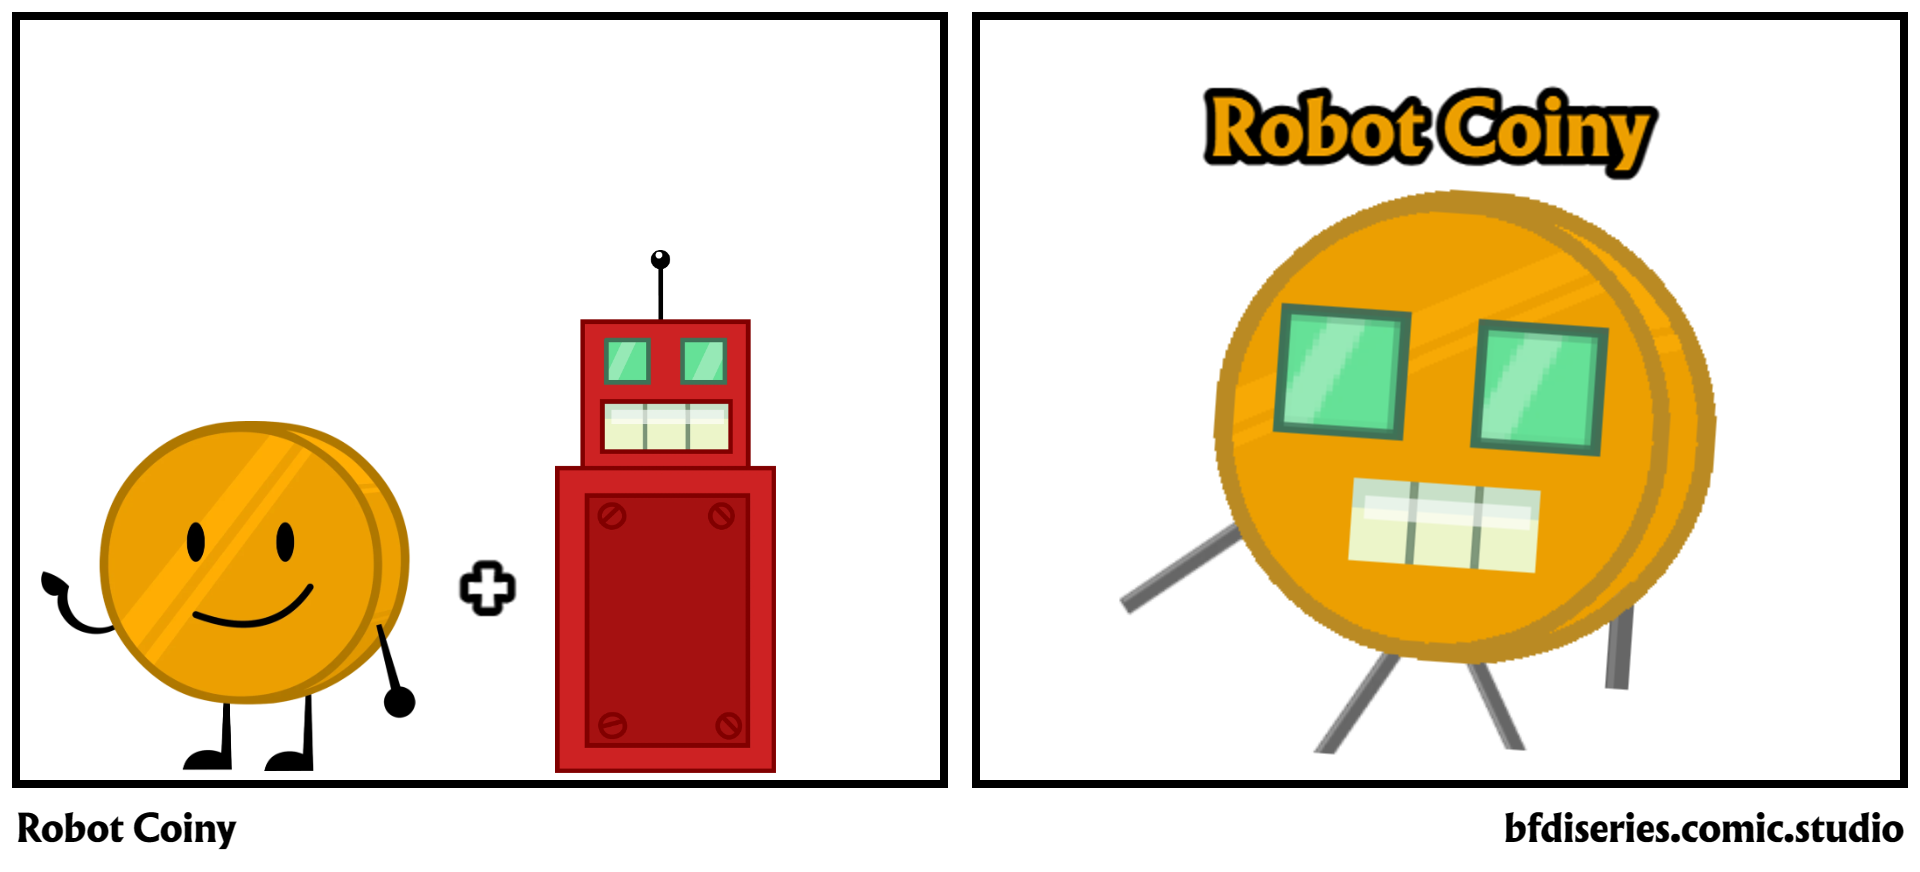 Robot Coiny